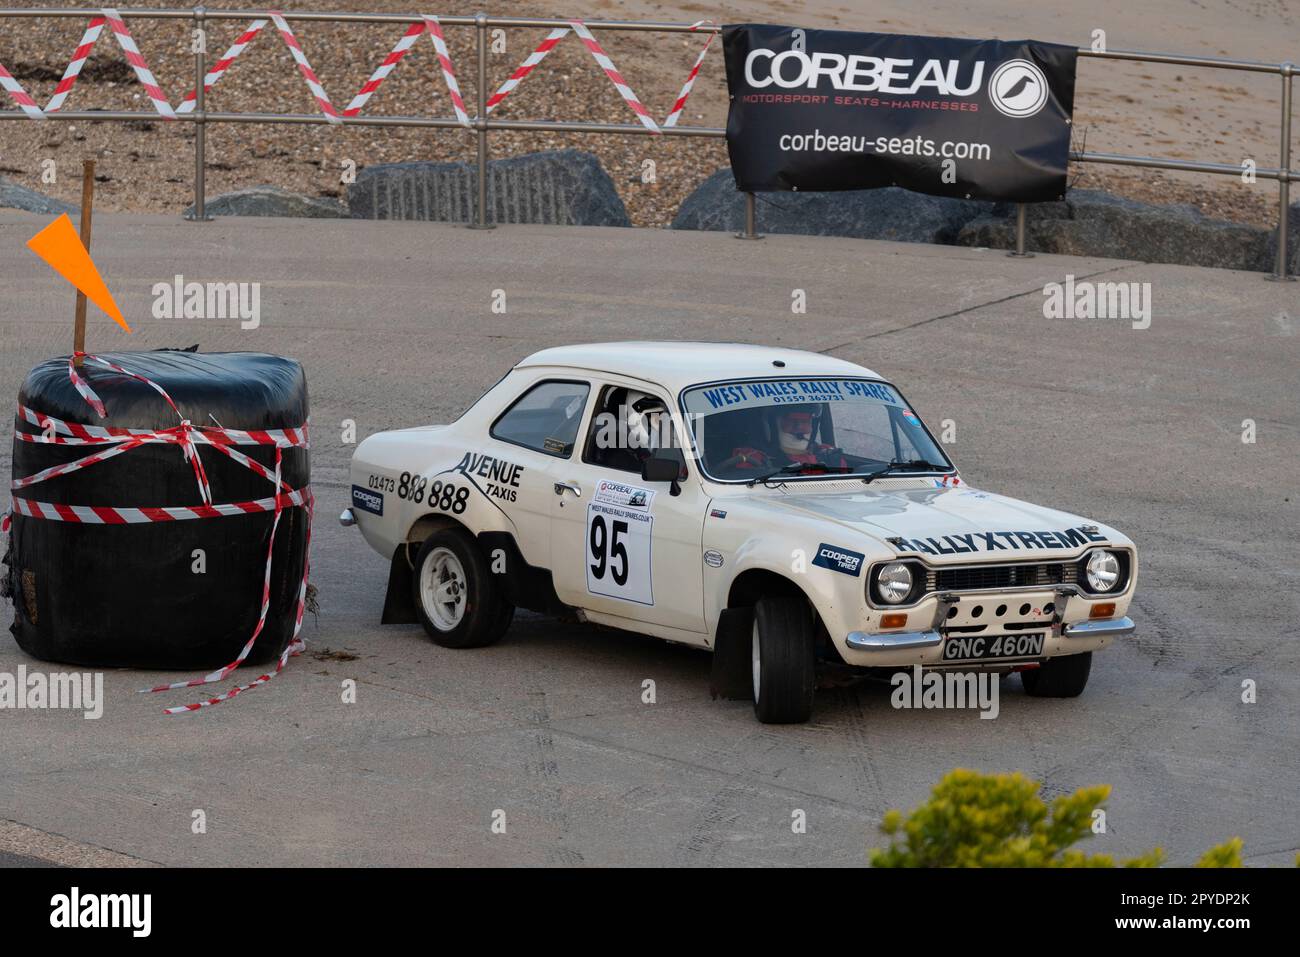 Edward Welham racing a classic 1974 Ford Escort Mk1 competing in the Corbeau Seats rally on the seafront at Clacton, Essex, UK. Co driver Stuart Rodd Stock Photo